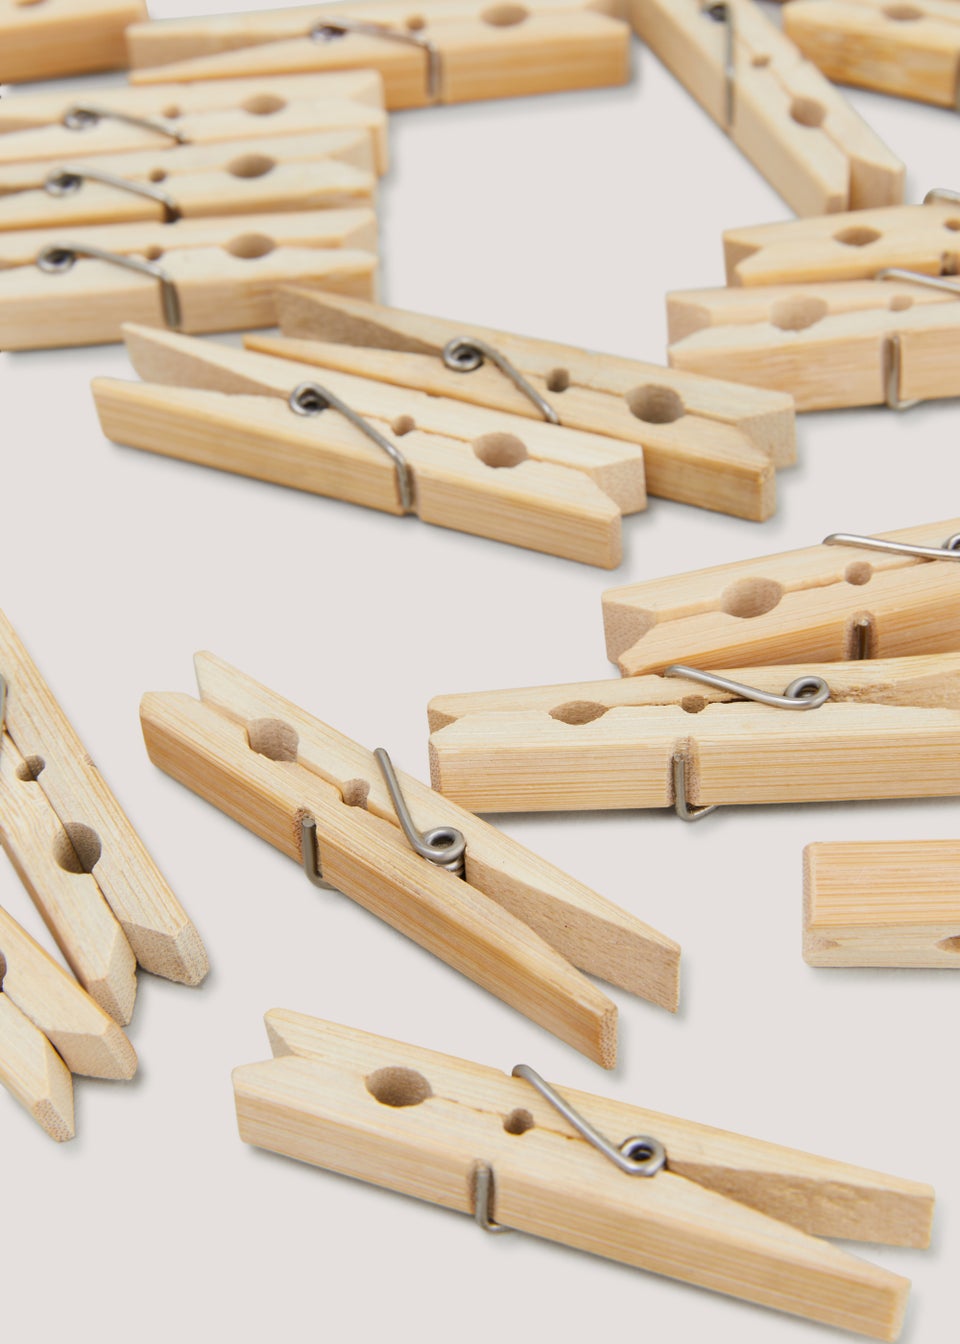 24 Wooden Pegs